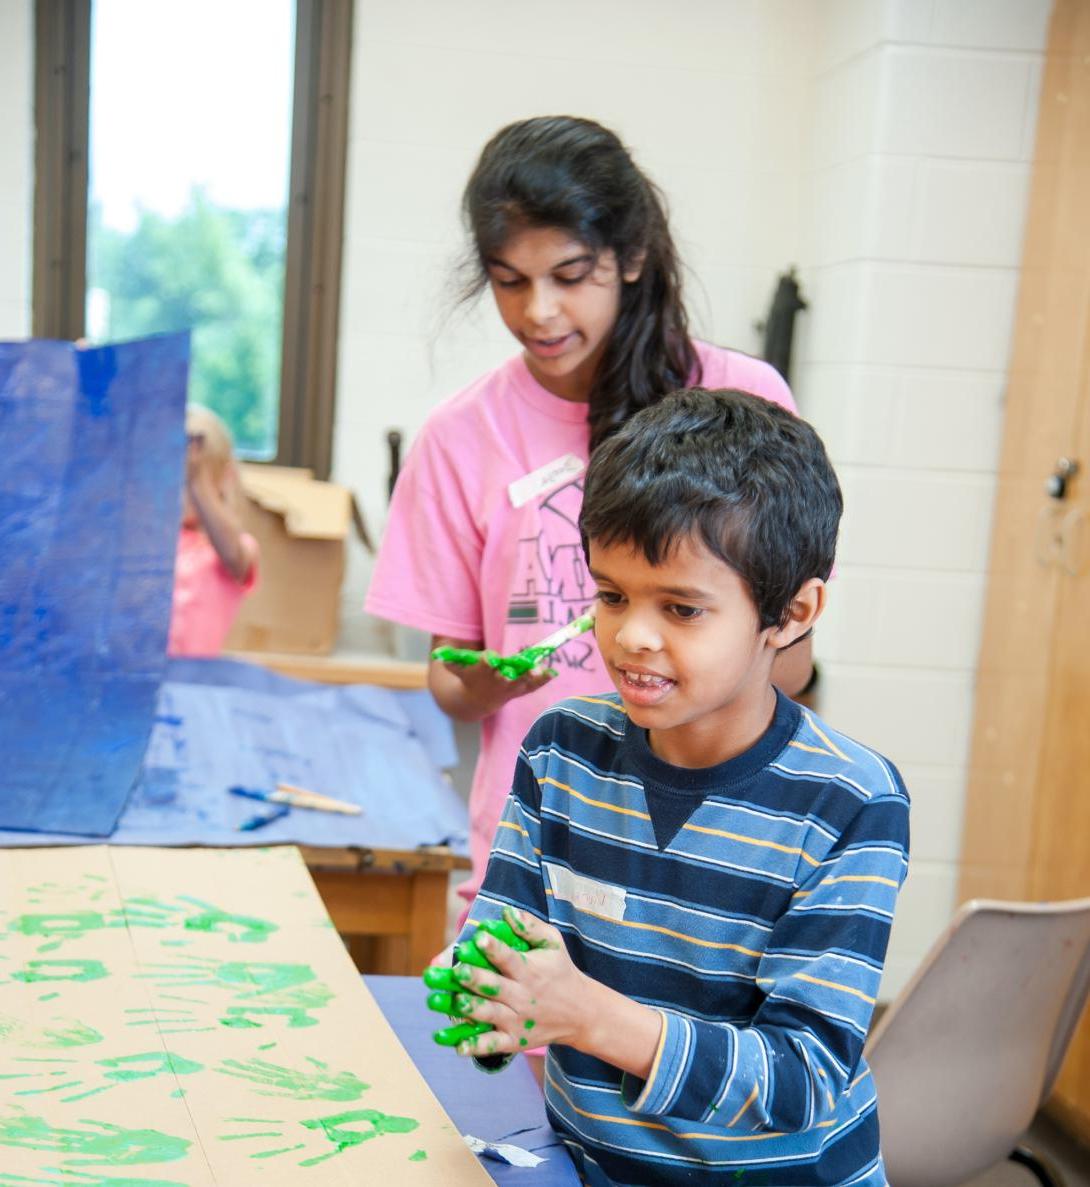 Youth working with clay at art camp